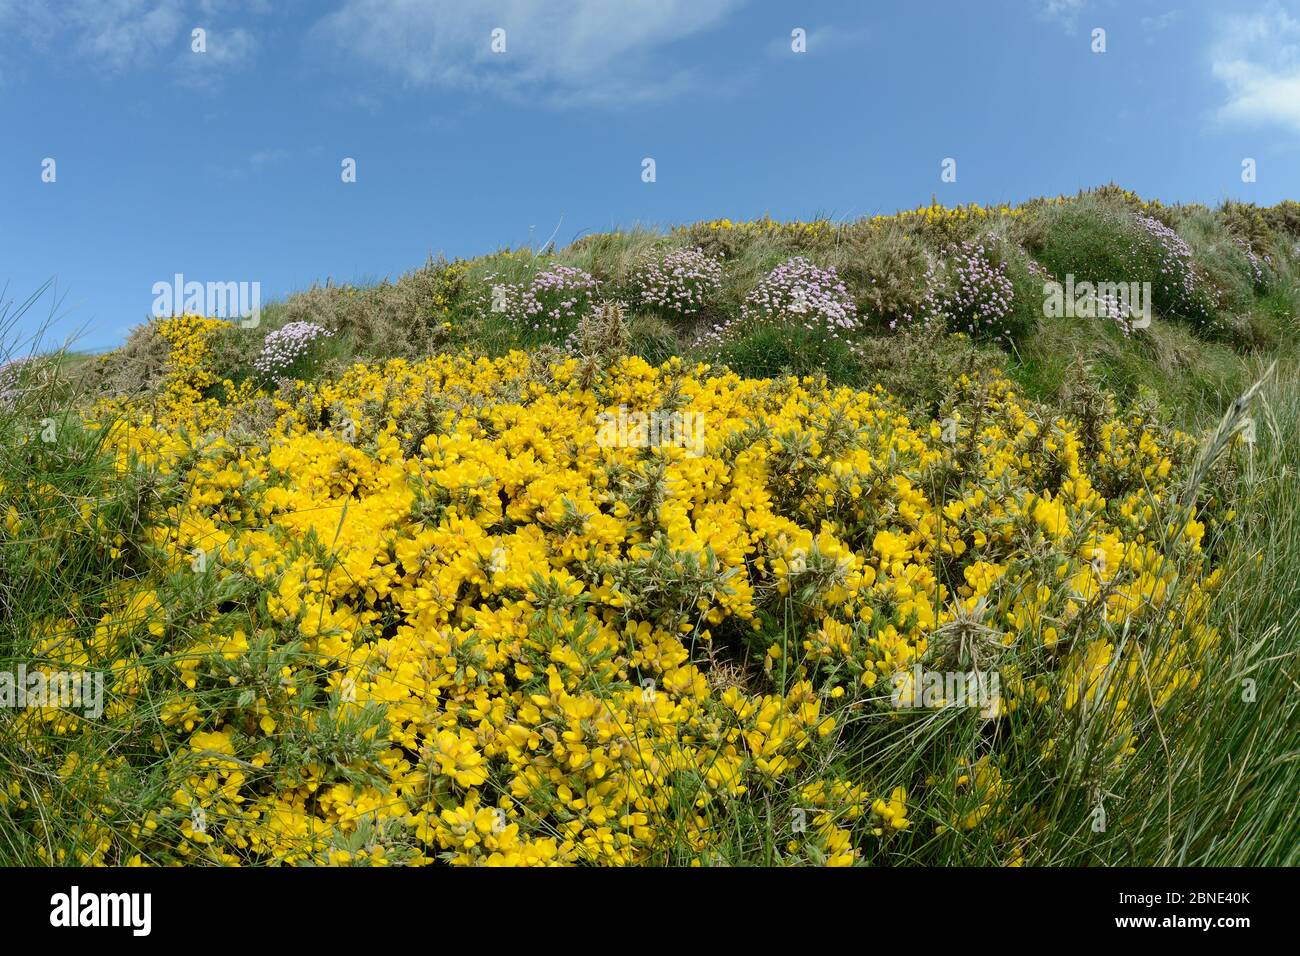 Common gorse bushes (Ulex europaeus) and Sea thrift (Armeria maritima) flowering on a cliff top, fisheye view, Widemouth Bay, Cornwall, UK, May. Stock Photo